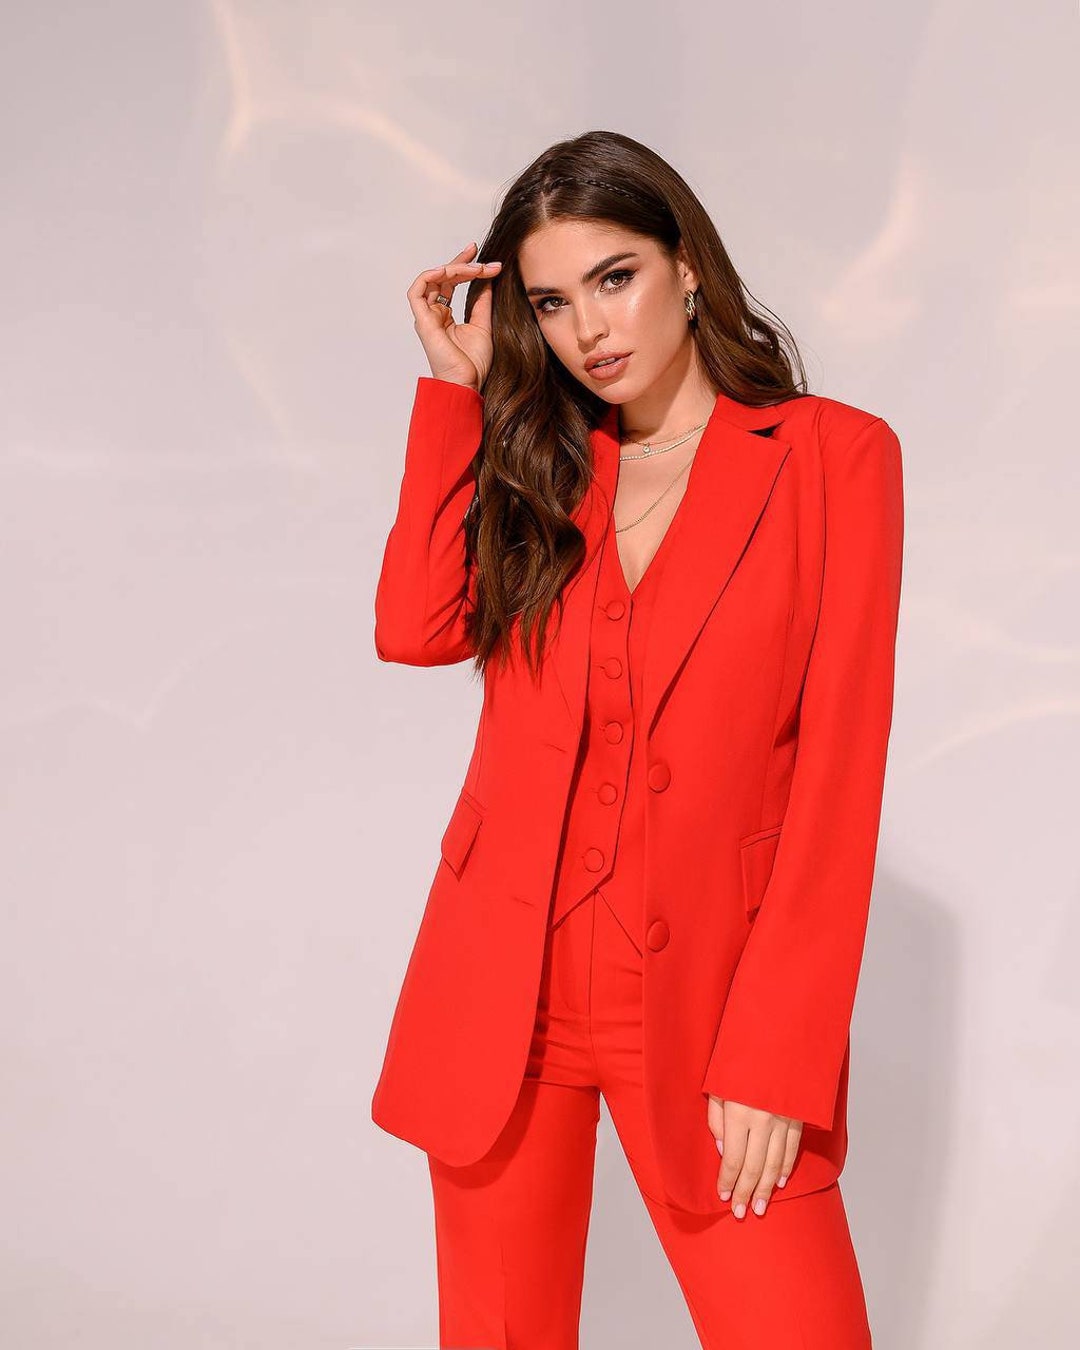 Red Pantsuit for Women, Red Formal Pants Suit Set for Women, Business Women  Suit, Red Blazer Trouser Suit for Women -  Norway